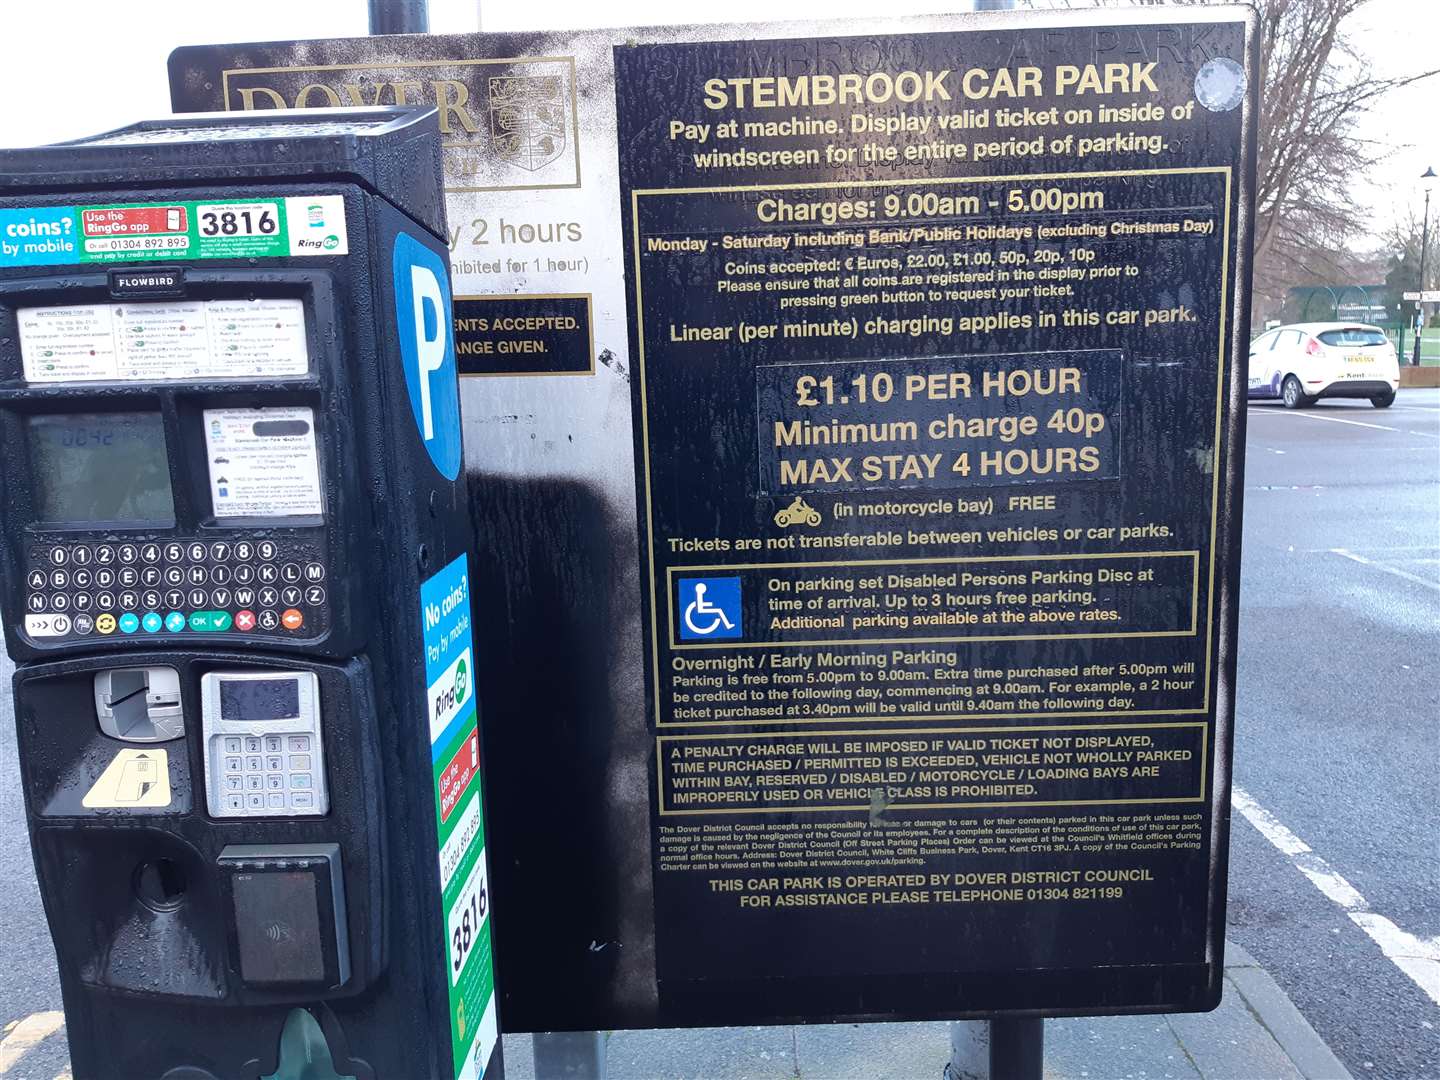 The present charges for the Stembrook car park in Dover